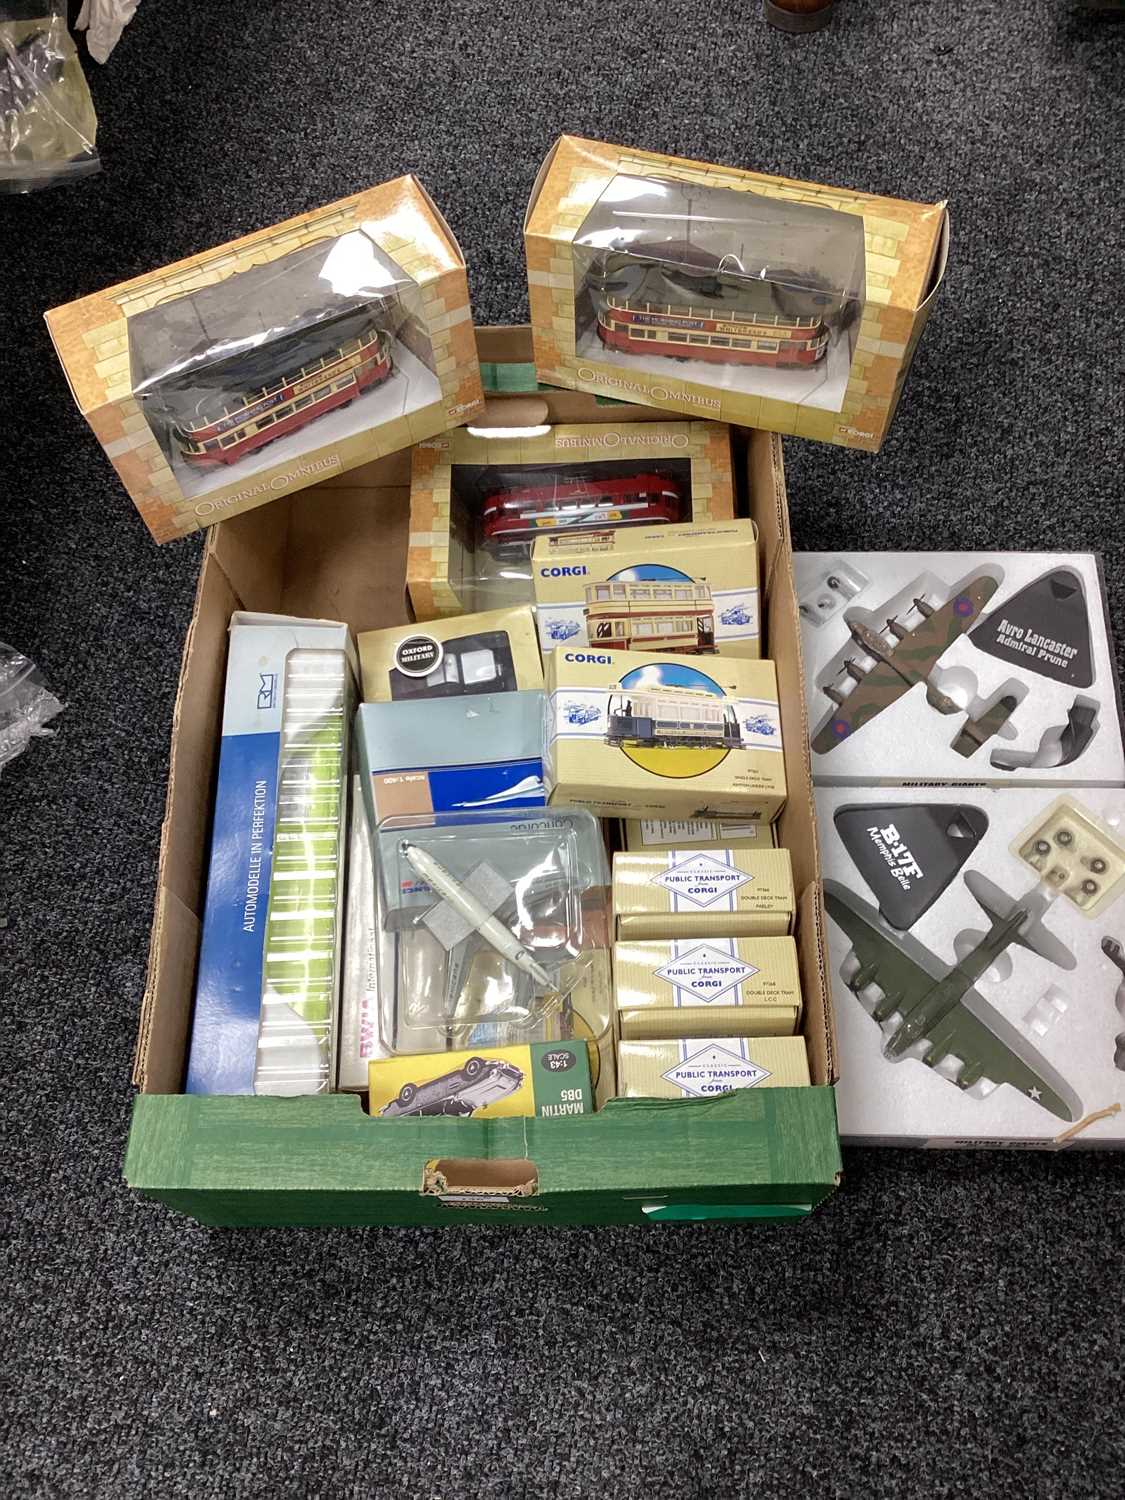 Diecast various commercial vehicles mainly trams, airplanes and cars from Corgi and others, boxed,